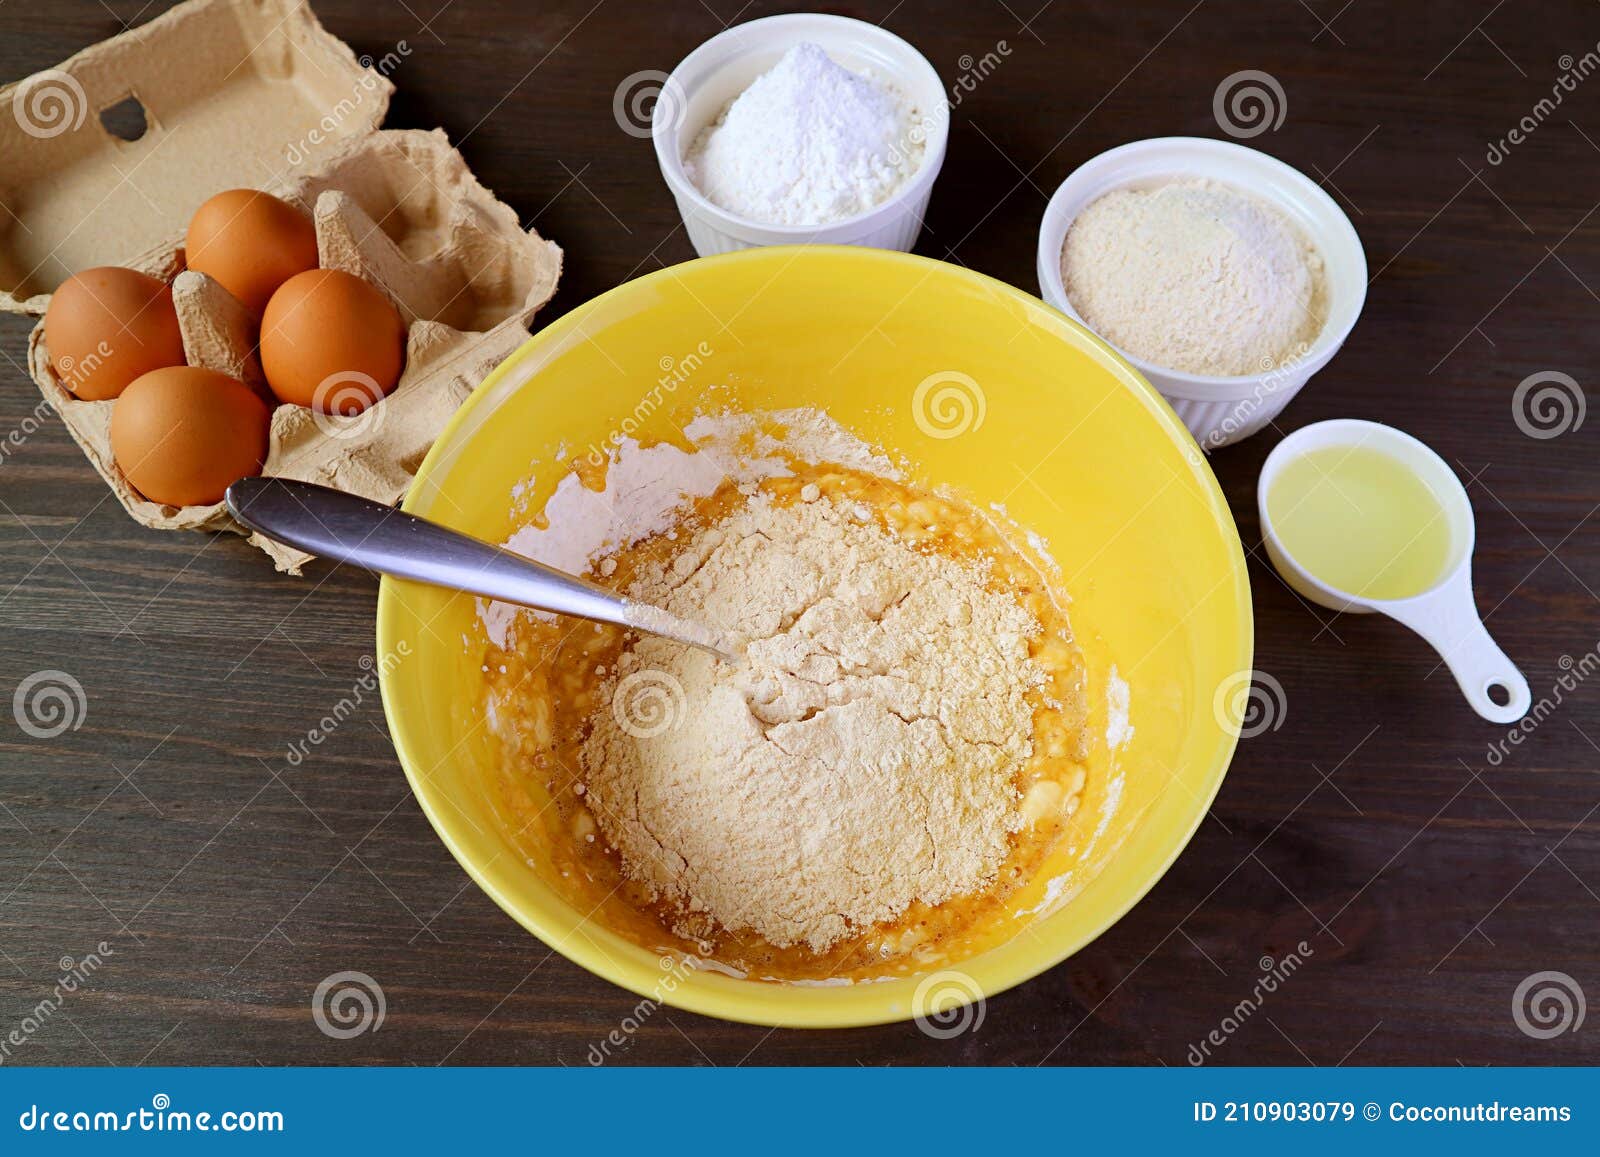 mixture in mixing bowl and with another ingredients for baking whole wheat cake